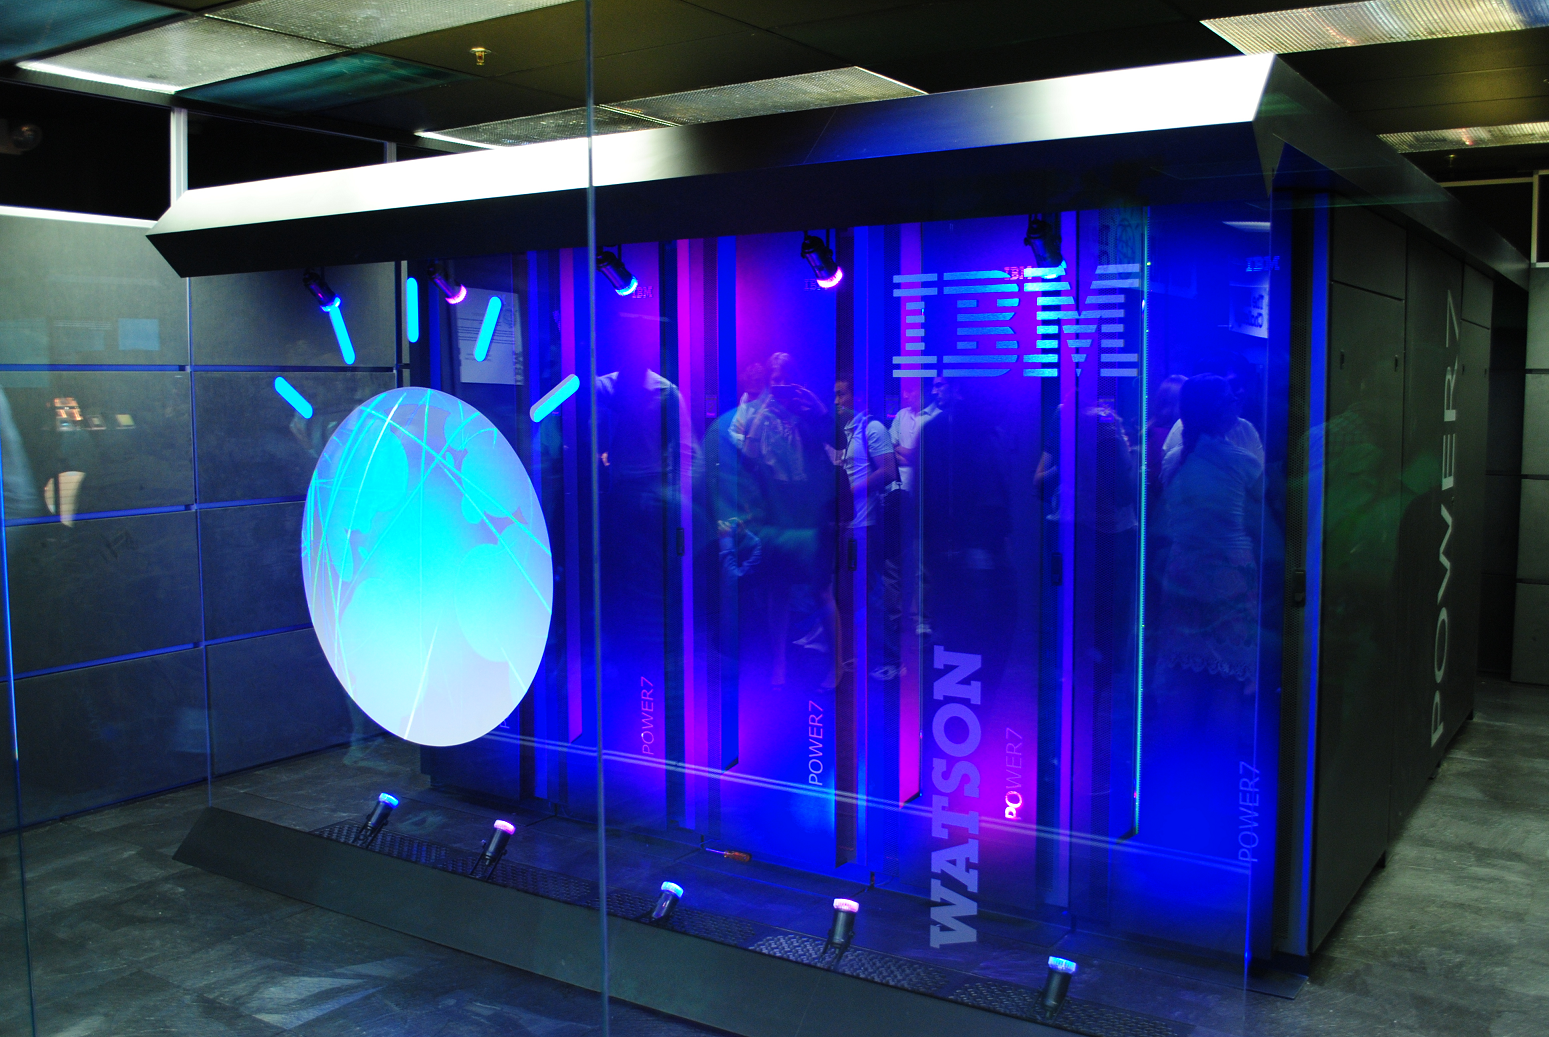 IBM recently pledged billion to fund Watson (above) - its own 'cognitive computing' machine that its hoped will one day understand the nuances of human language.